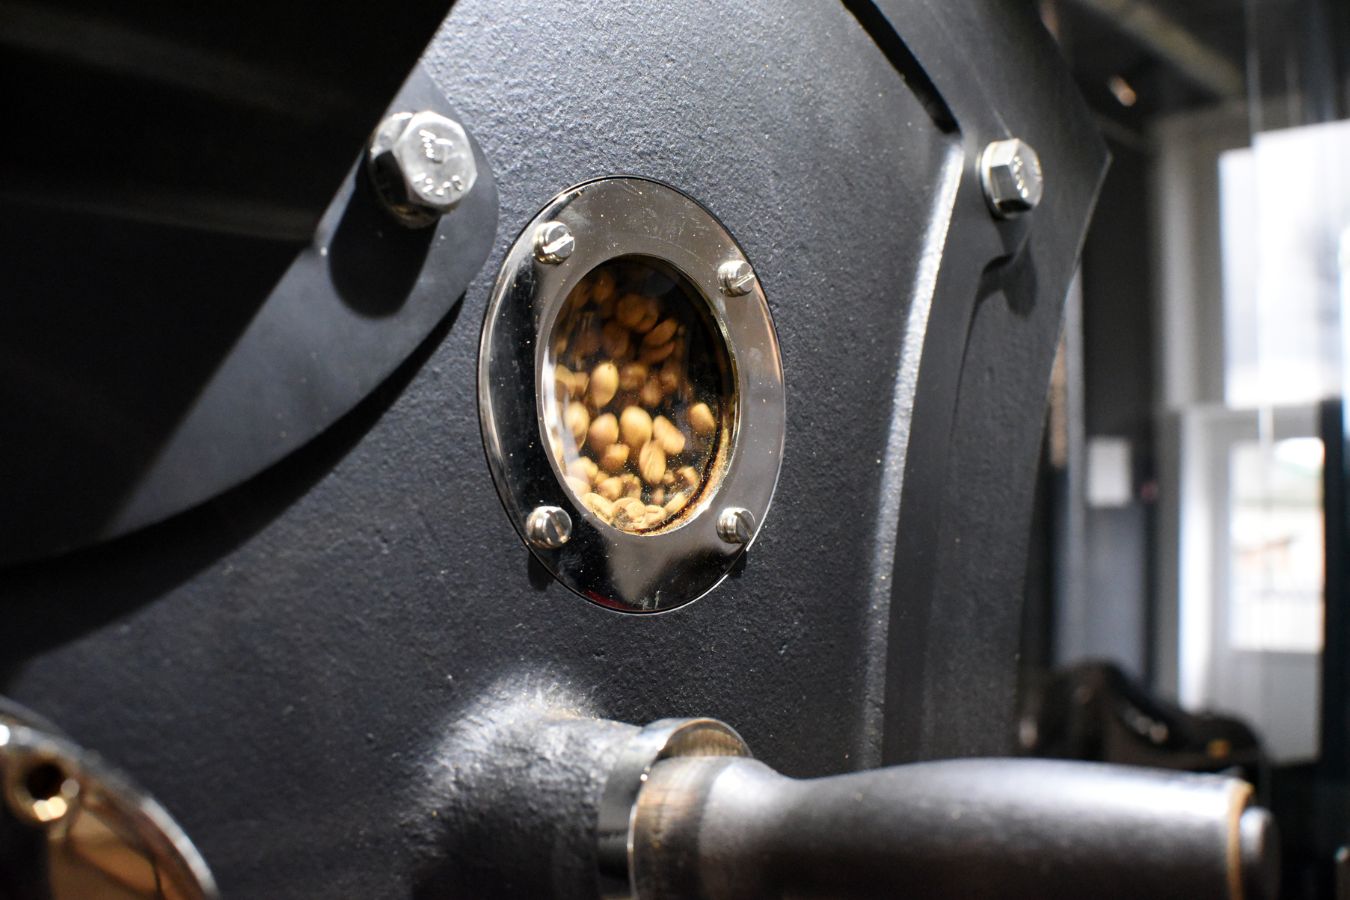 Why Should You Choose a Vietnamese Coffee Roaster